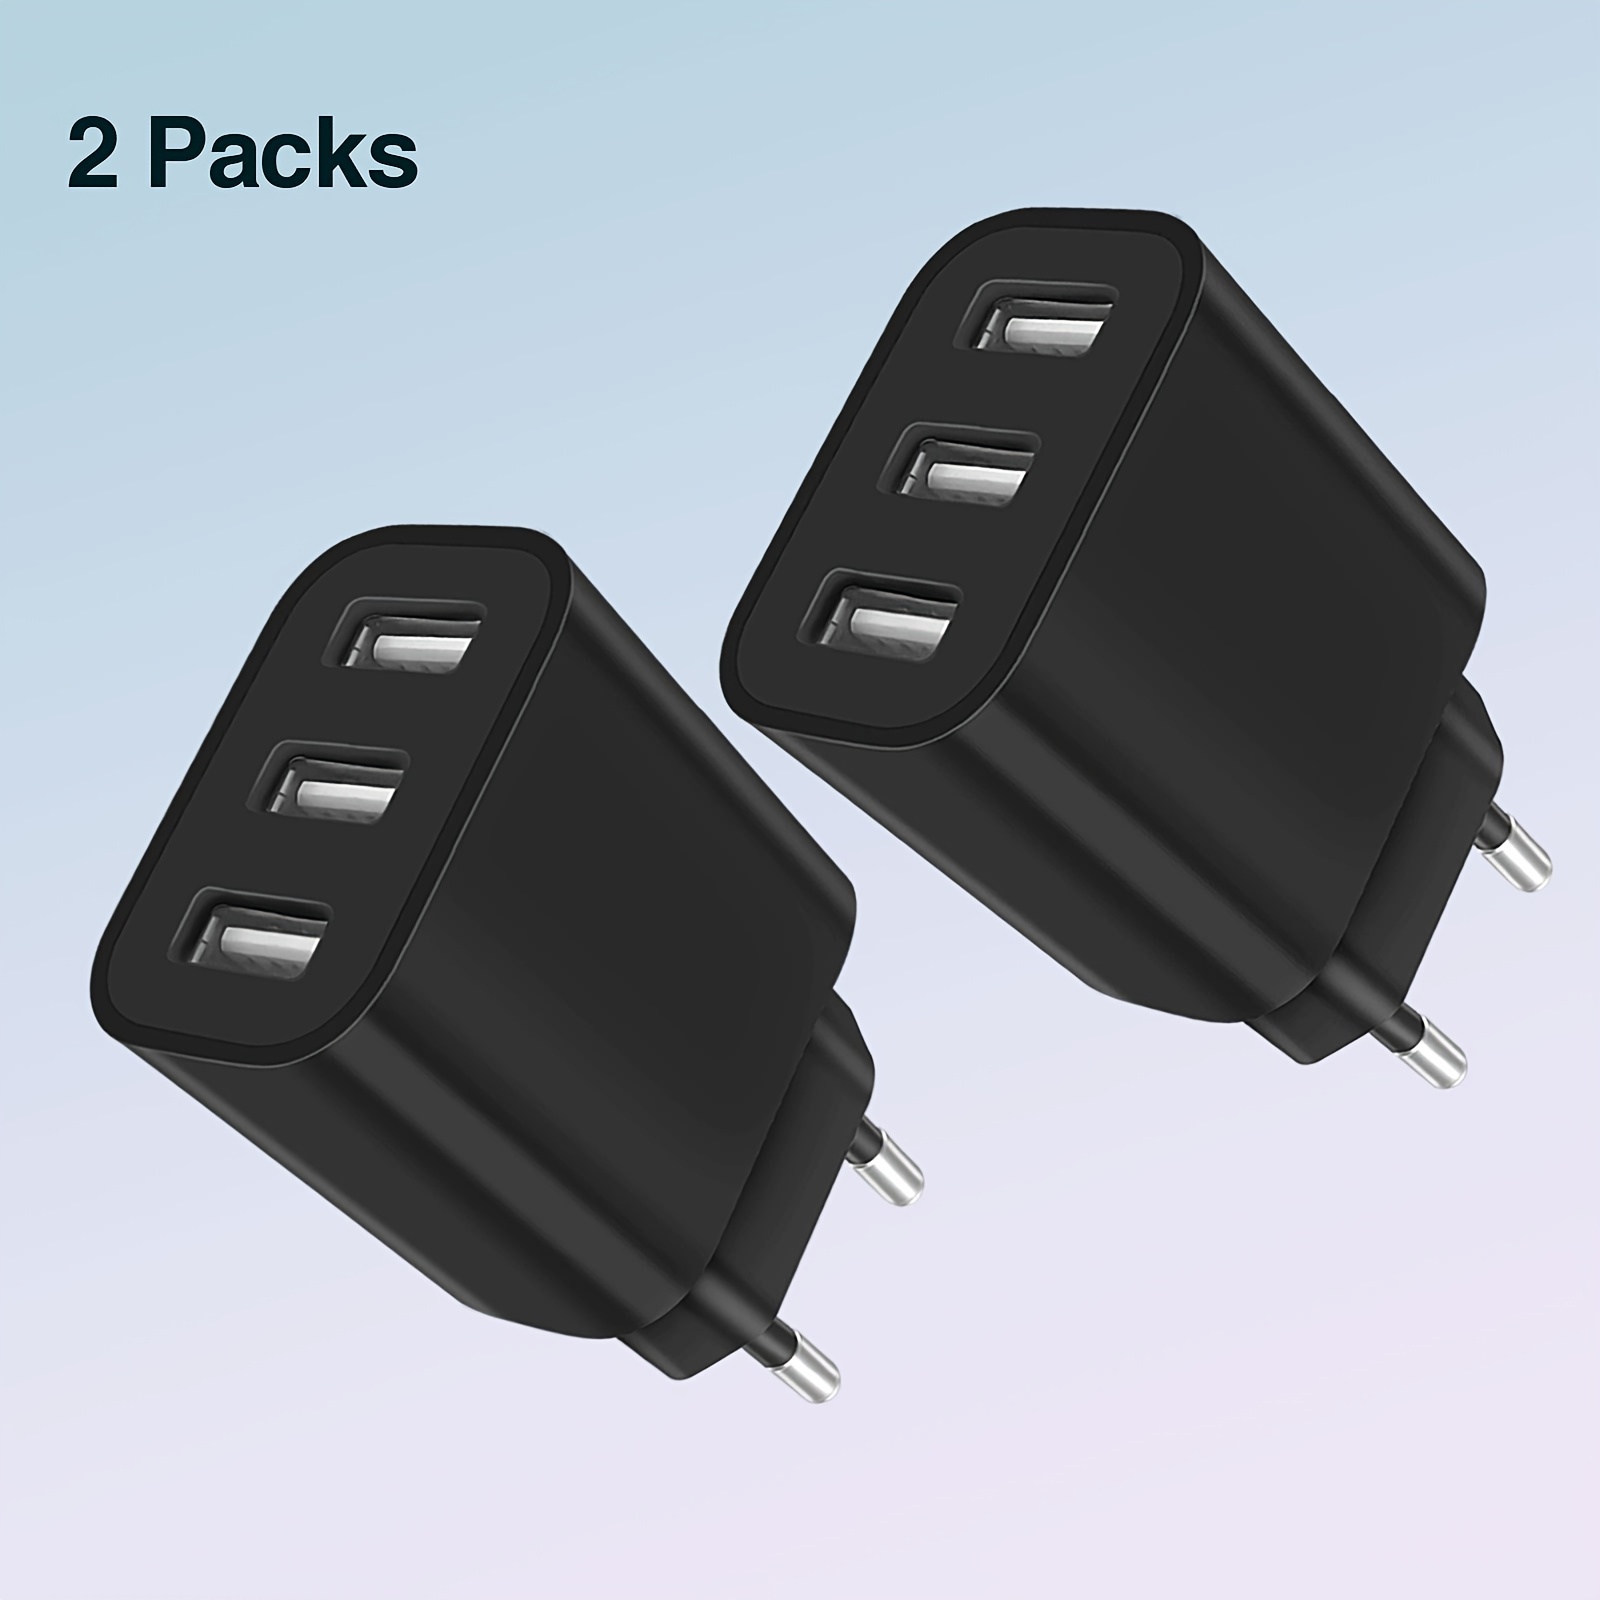 

2pcs Usb Wall Charger, 3-port Fast Charging Adapter, Compact Plug Cube For 14/13/12/11/xs/x/8, Samsung Galaxy S22/s21/s20, Quick Charge Power Block - Black (4.2cm X 7.8cm X 2.8cm)